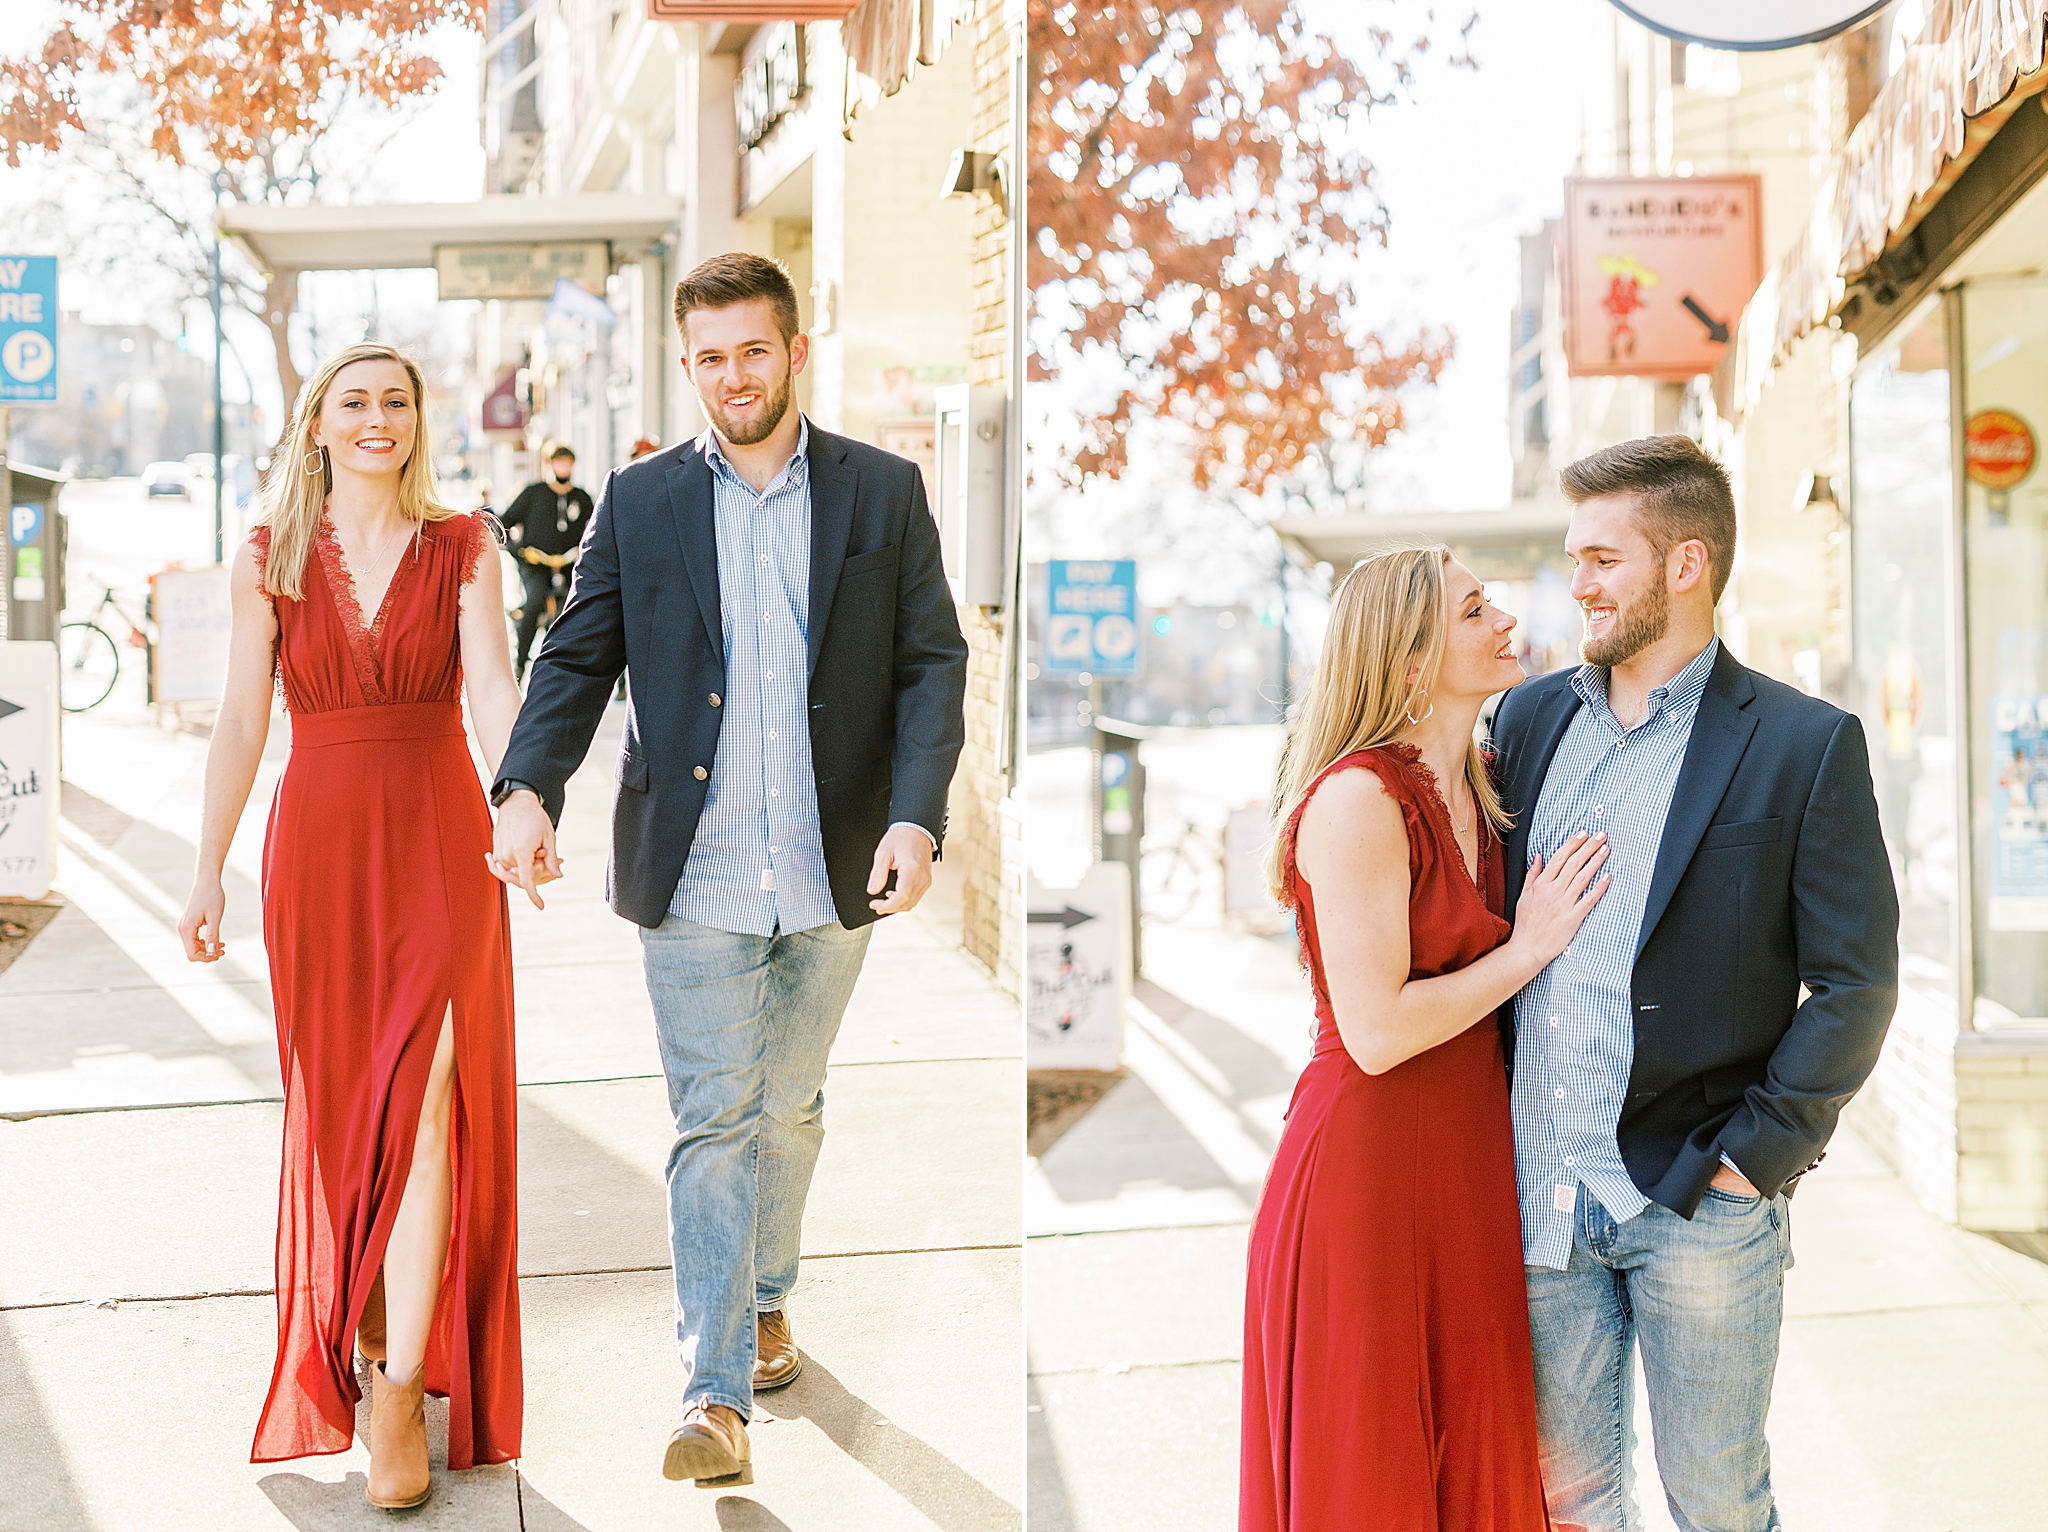 winter Chapel Hill engagement session with bride in red gown